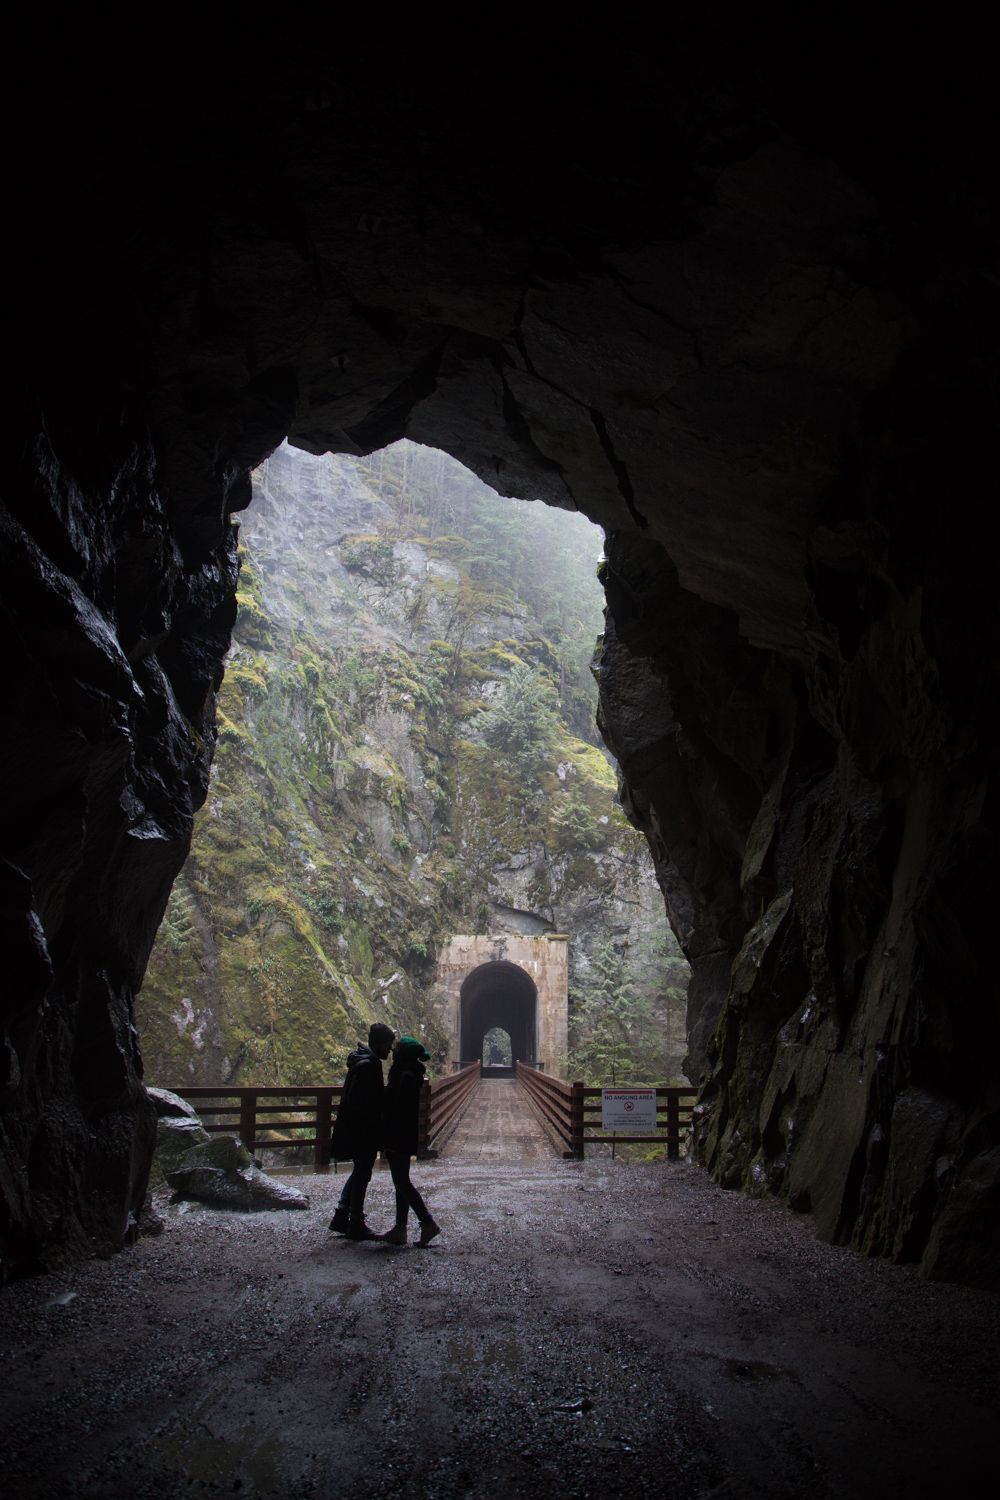 A Rainy Day at Othello Tunnels in Hope, British Columbia